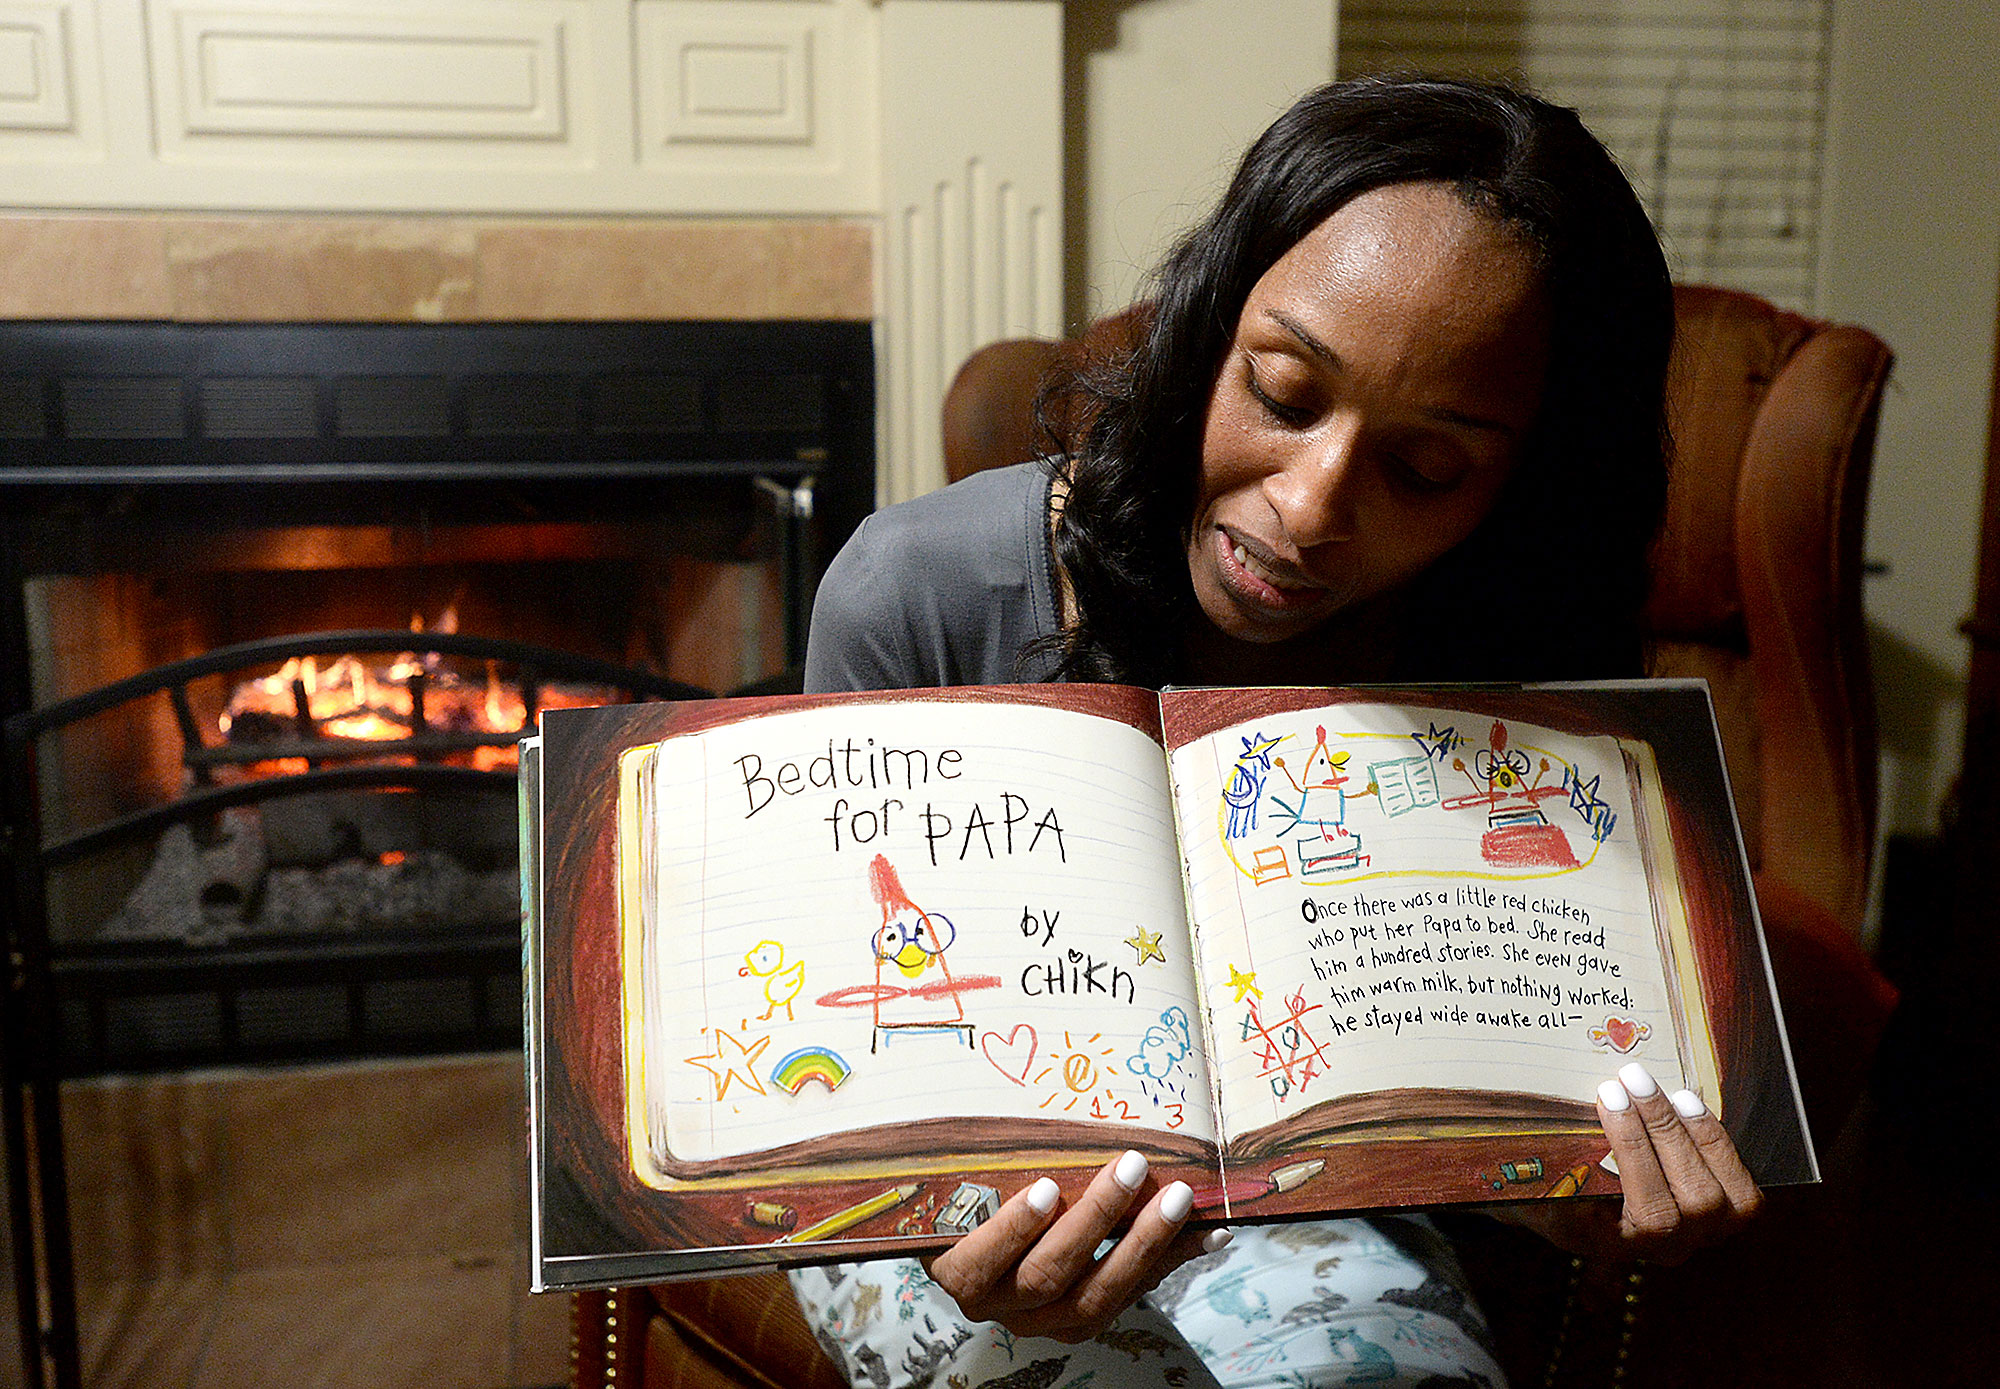 Principal in PJs reads bedtime stories to kids on Facebook Live. ‘This is just more love’